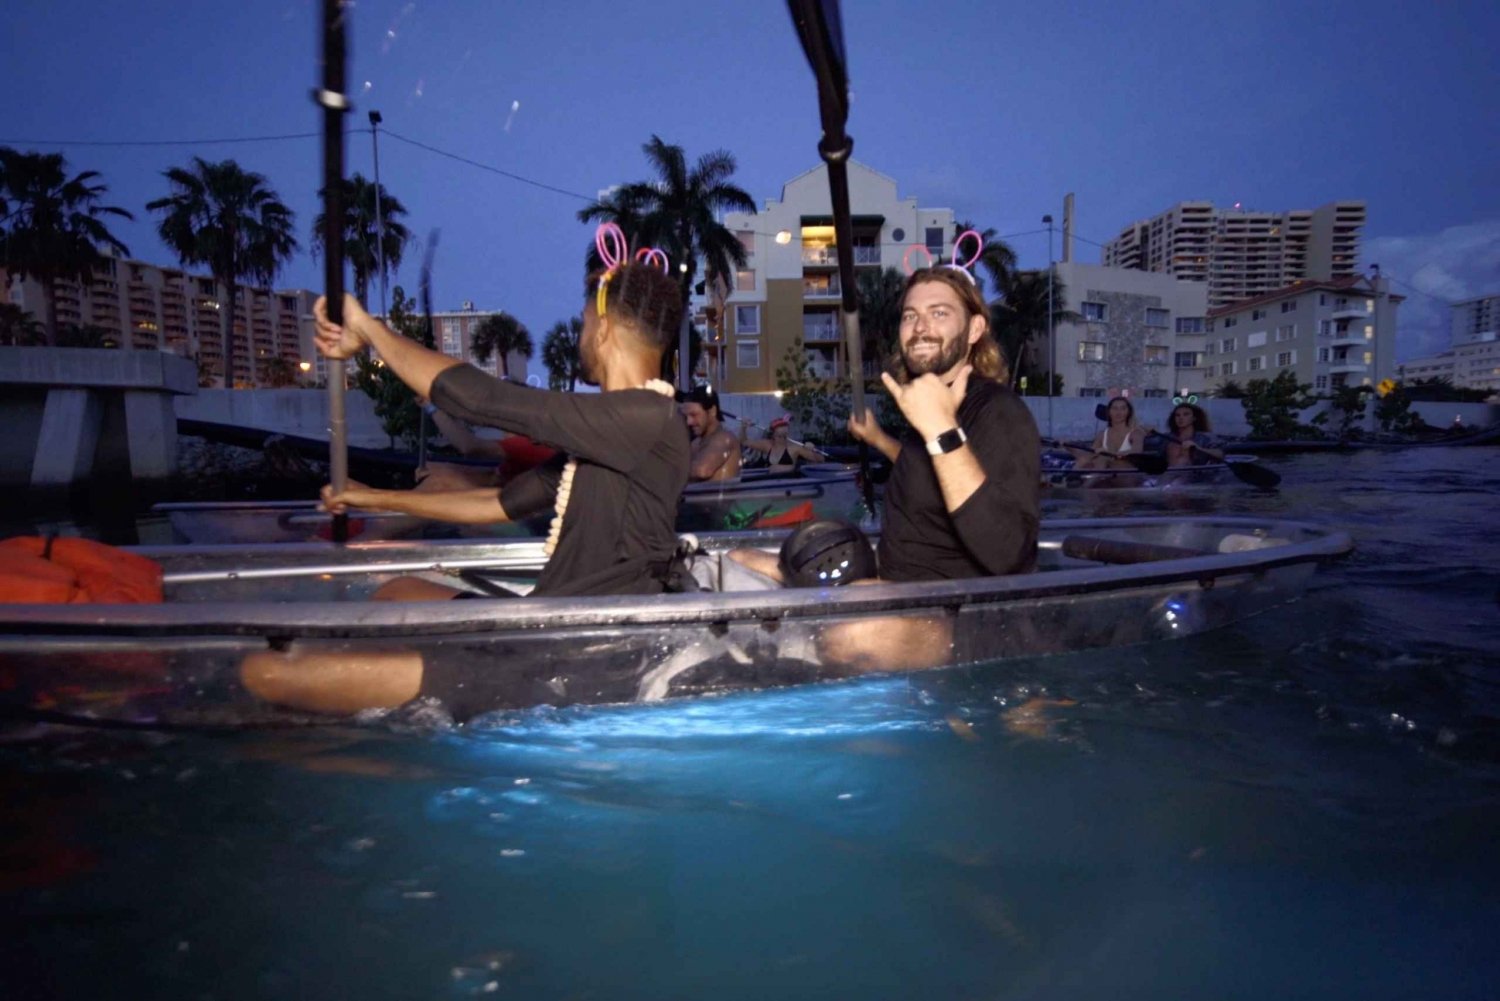 Lighted Clear Kayaks at Night w/ Champagne in Miami Beach